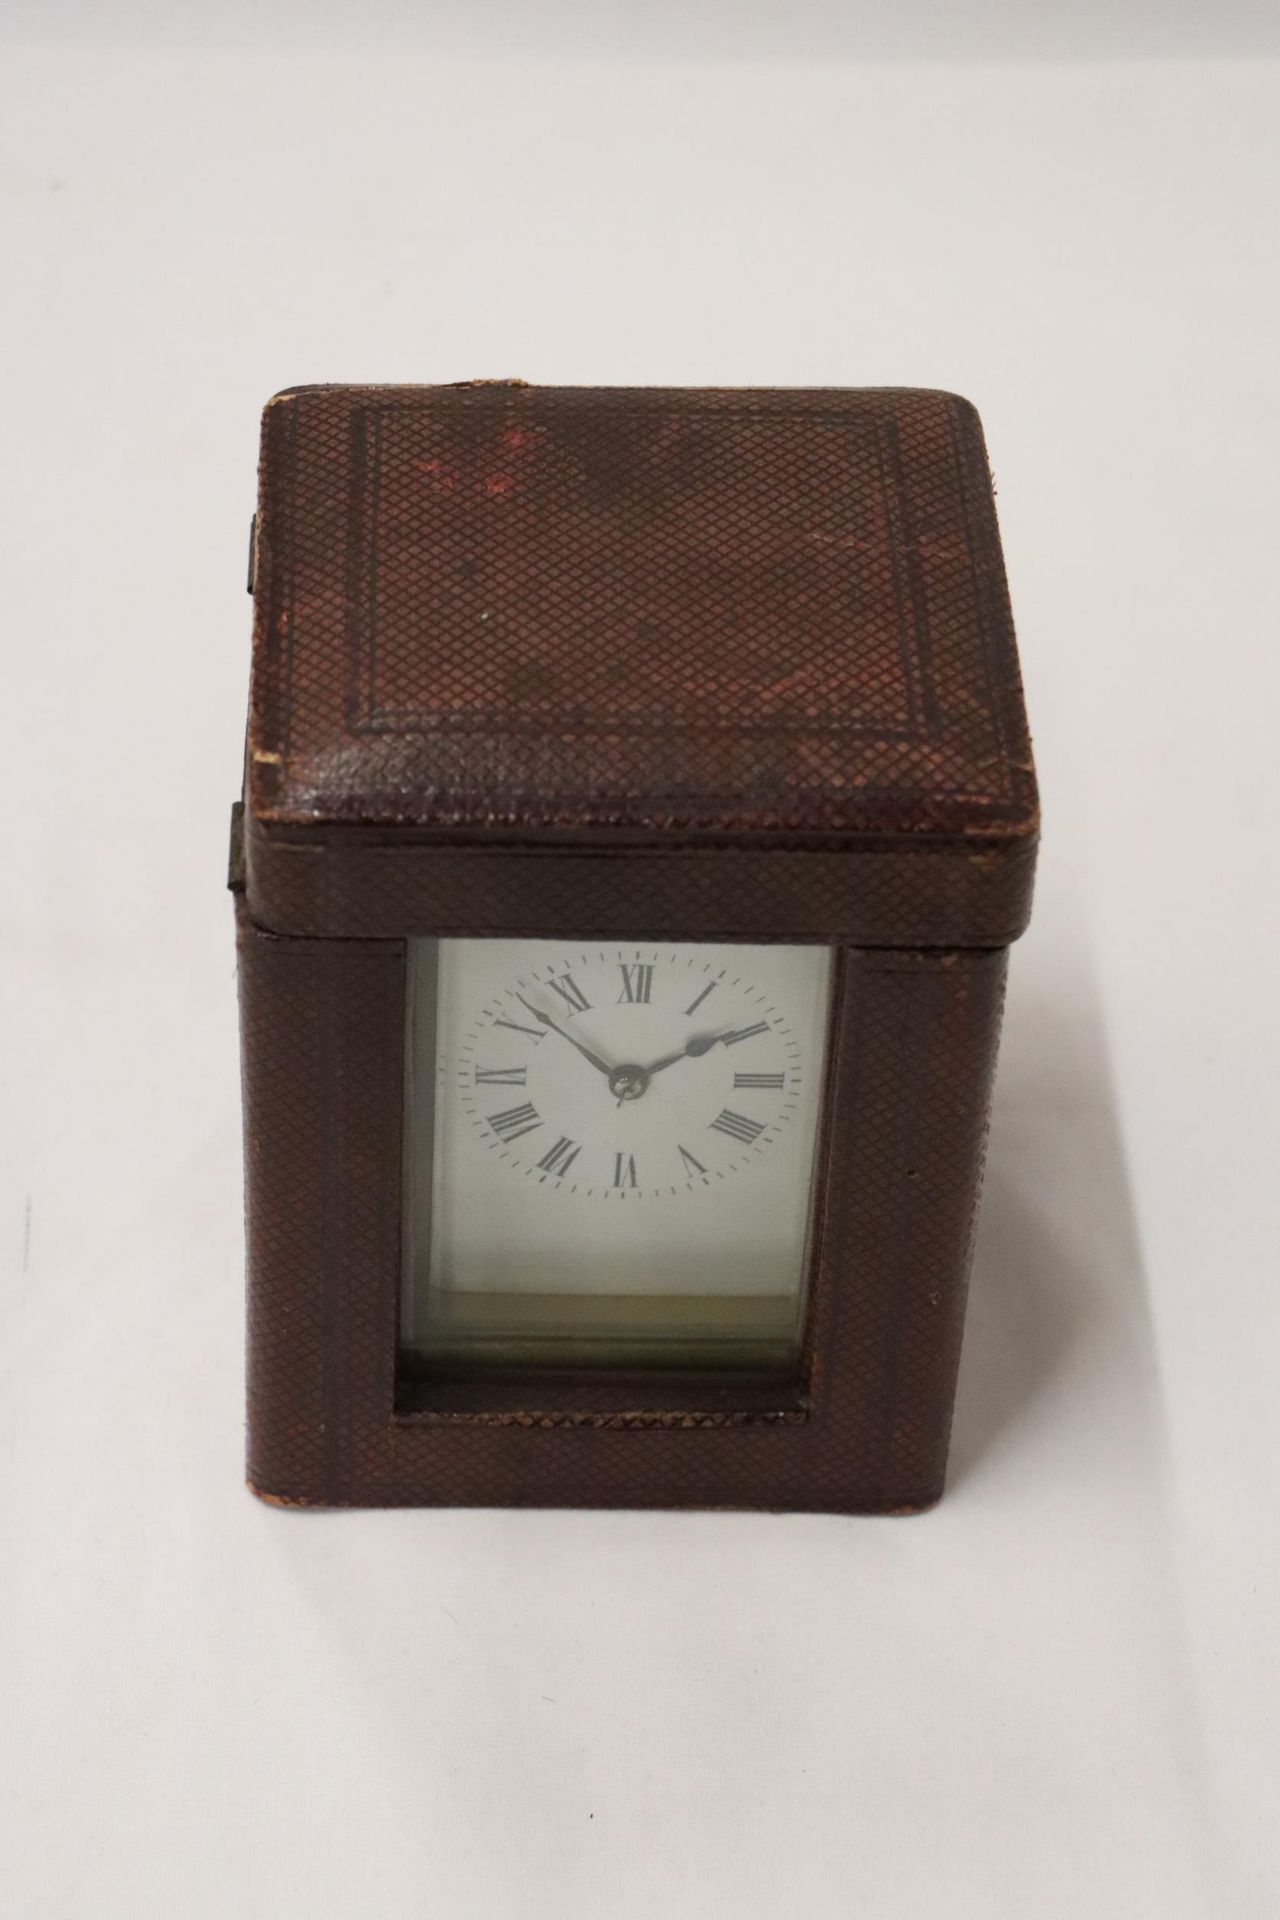 A VINTAGE BRASS ALARM CLOCK WITH GLASS SIDES TO SHOW INNER WORKINGS, IN A LEATHER CASE - Image 2 of 11